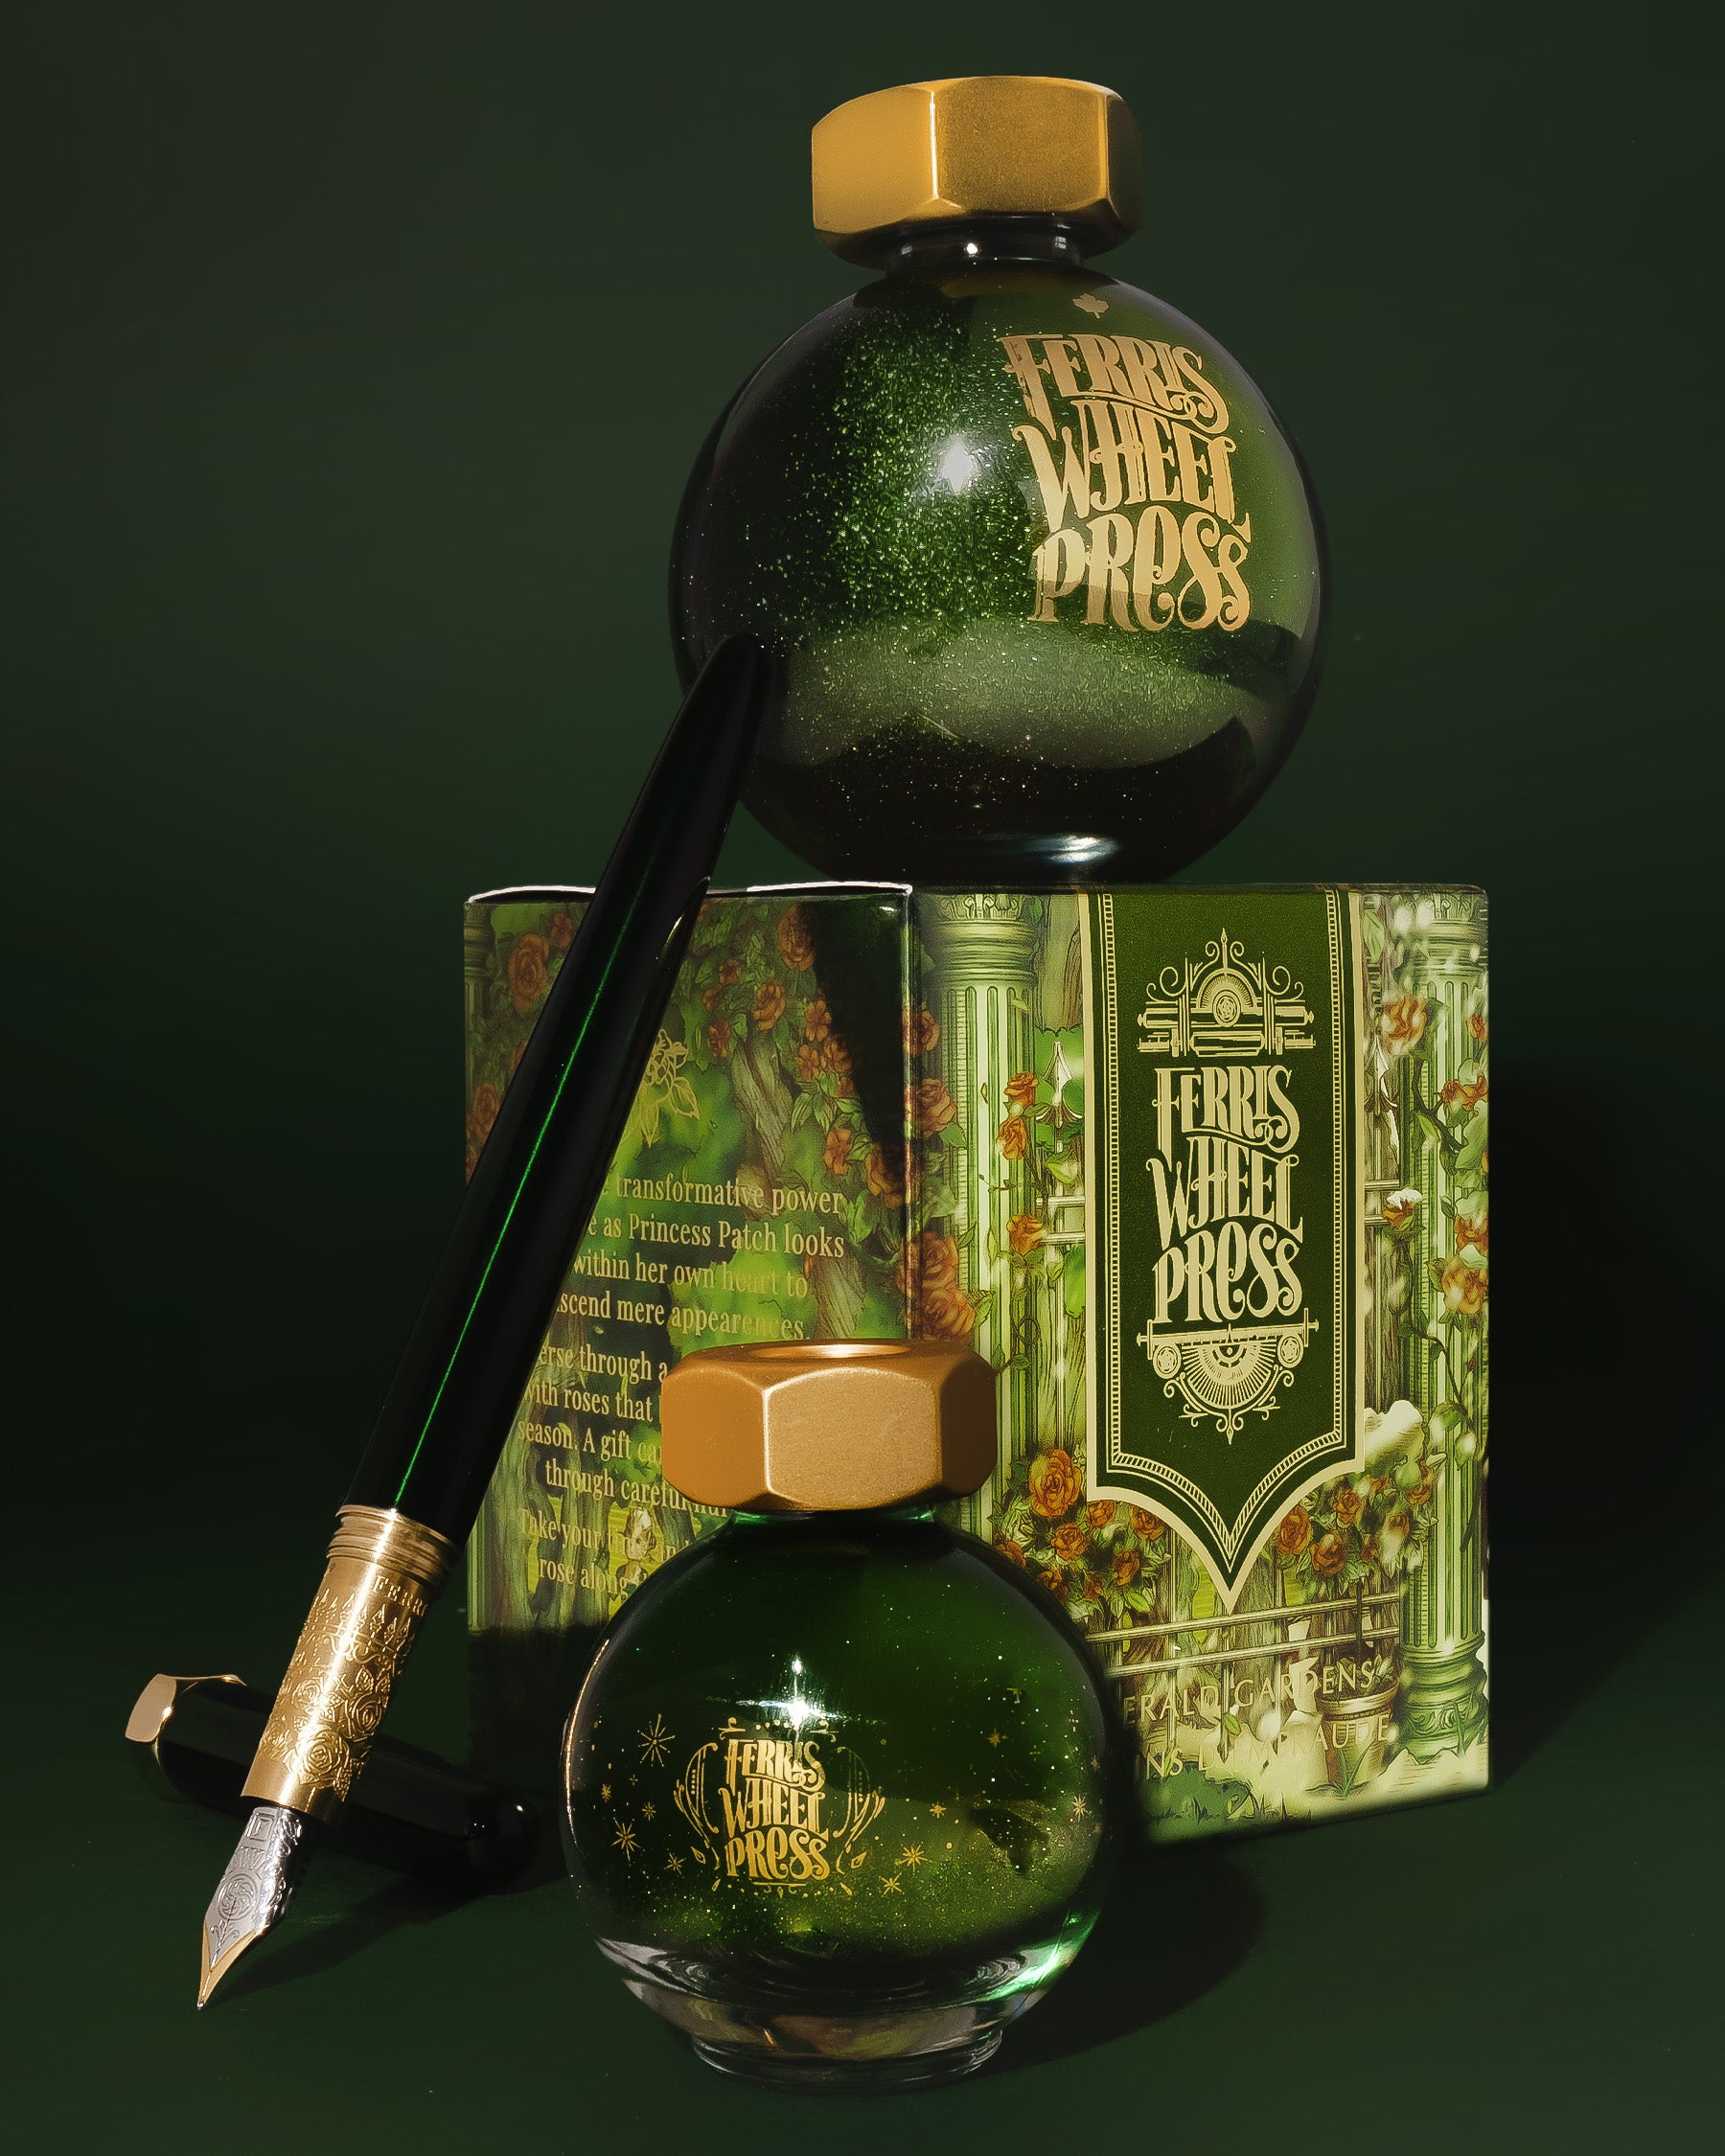 FerriTales | The Beauty and the Beast - Emerald Gardens Ink 85ml